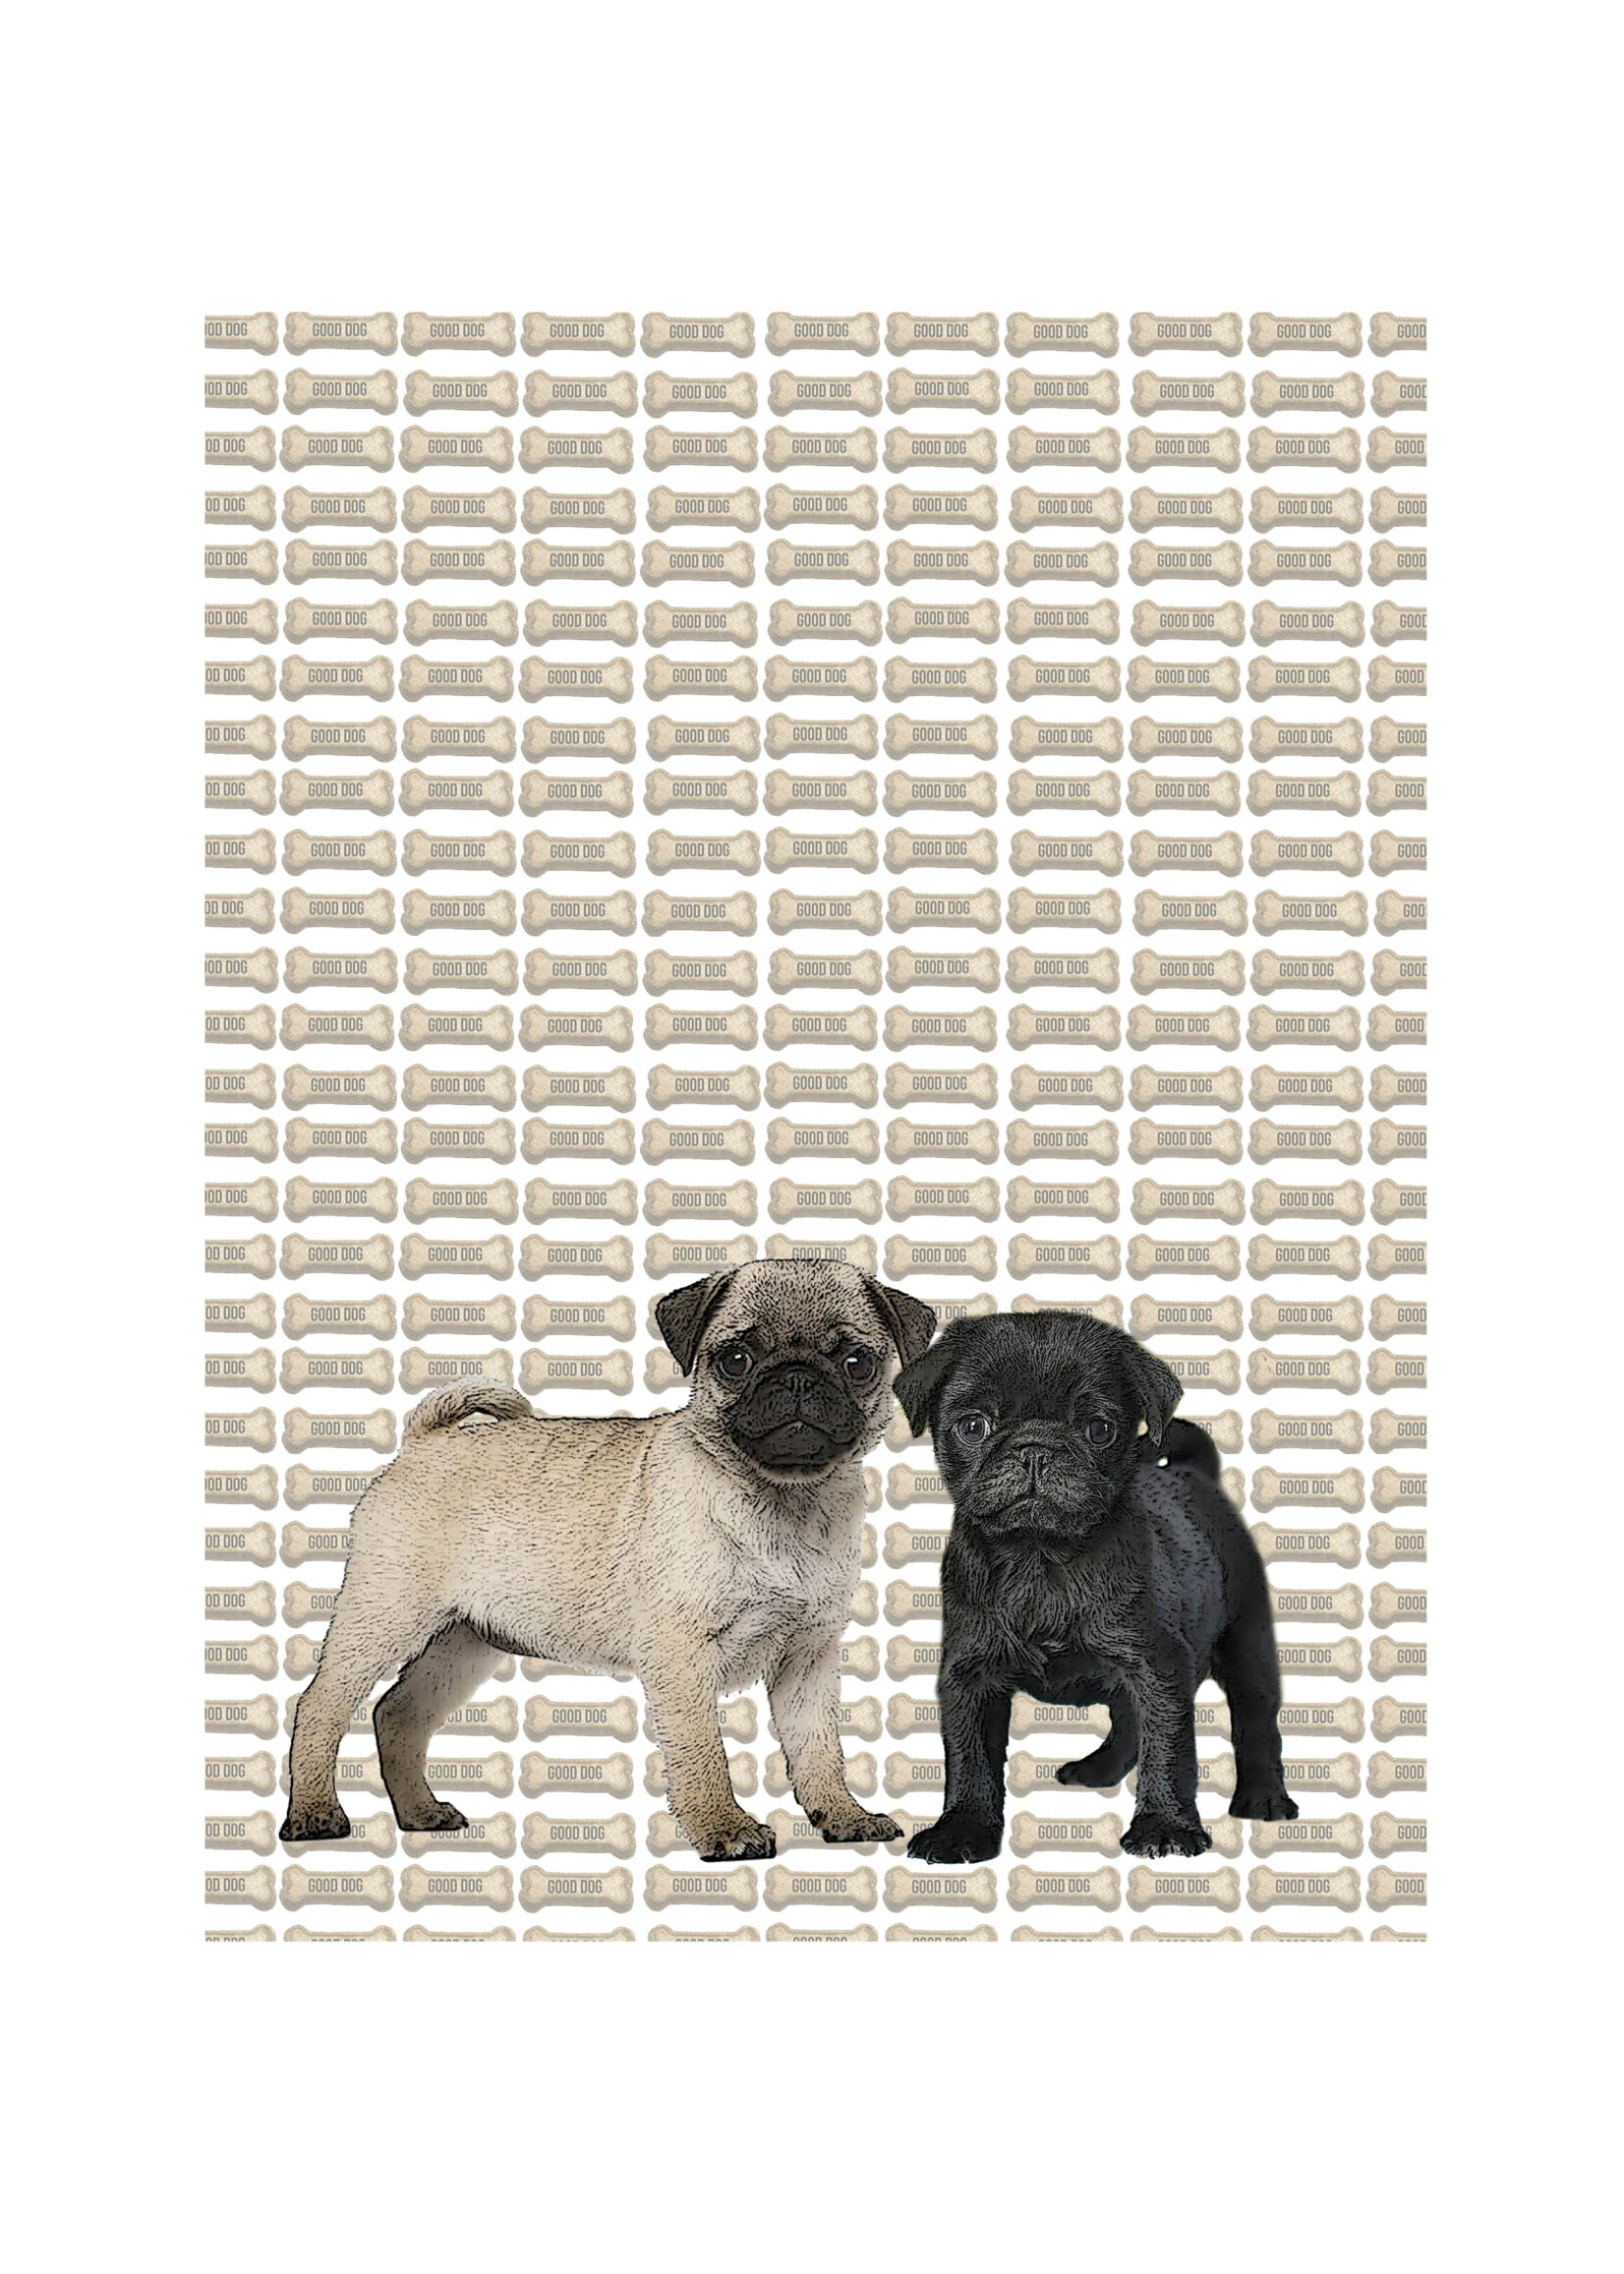 Alphie and Ollie pug puppy kitchen towel 18 x 24 inches flour sack material